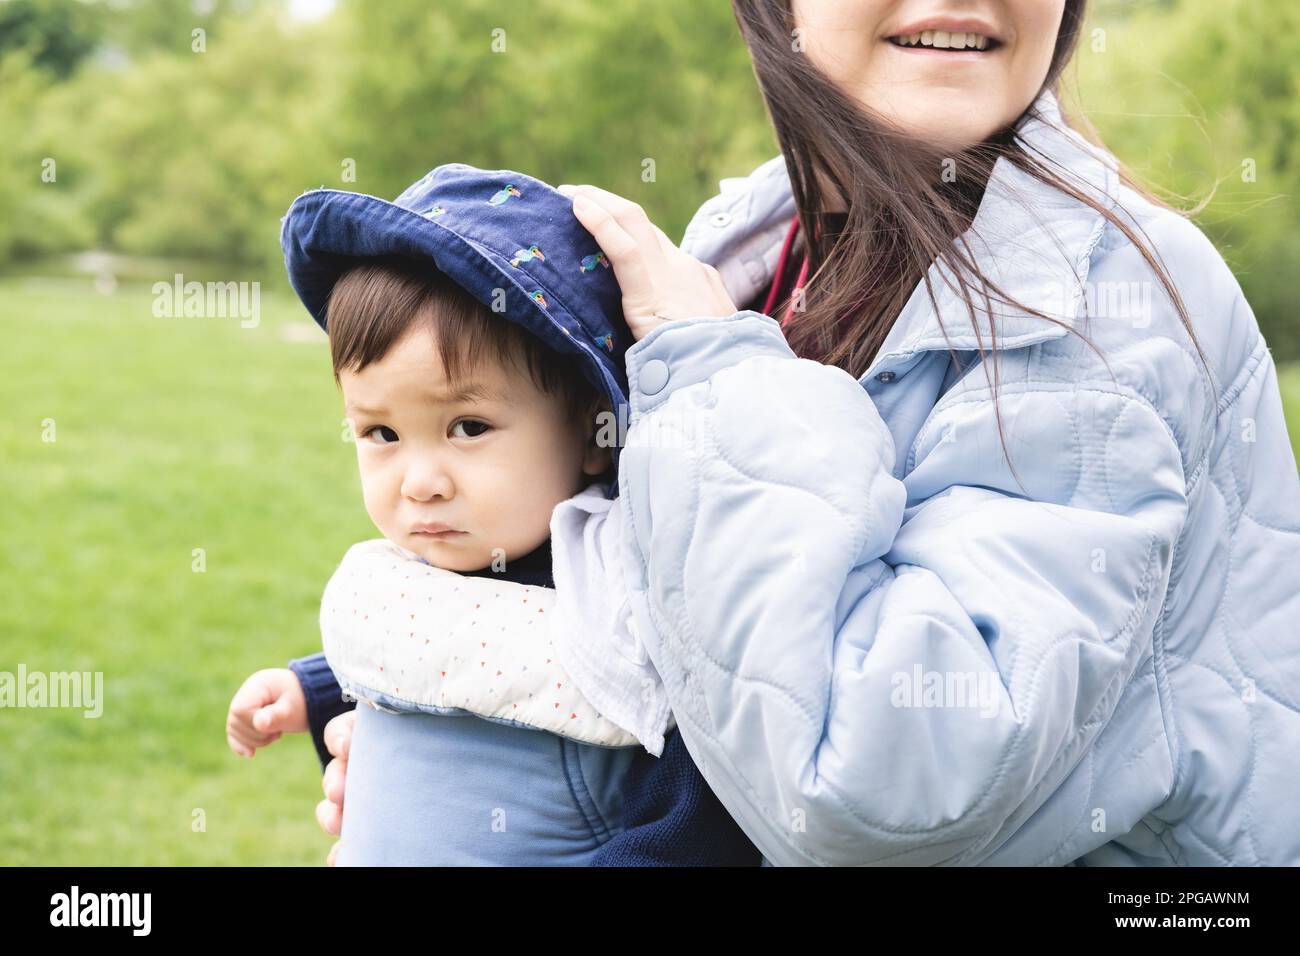 Close-up photo of a male infant carried by his smiley mother on a baby carrier wearing a blue hat walking at the park. He is feeling poor and looking Stock Photo